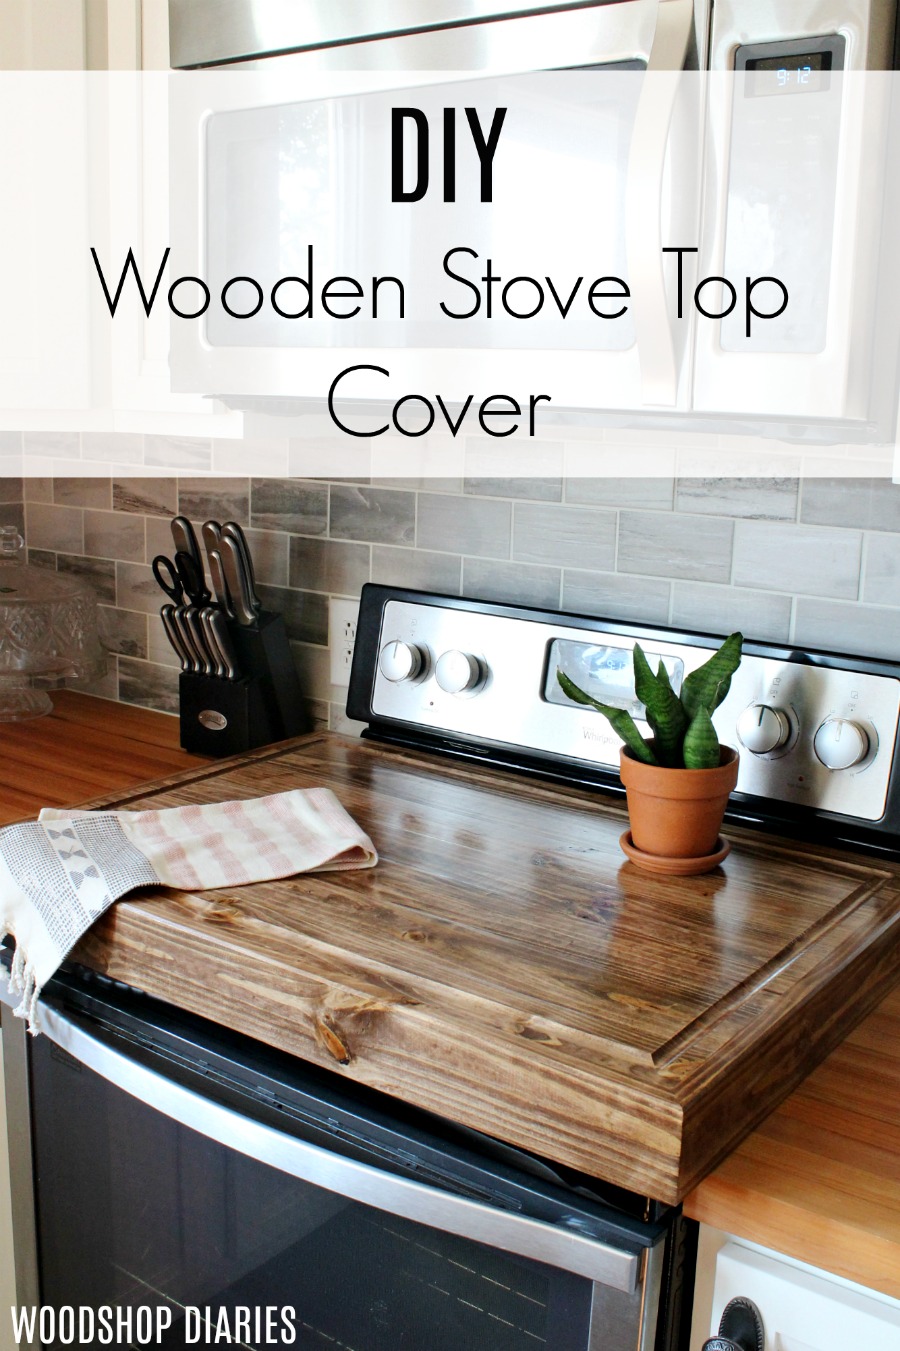  Wooden Stove Top Cover Board for Gas Burner & Electric Stove,  Noodle Board Stove Cover for Gas Stove Top, Pine Wood Stovetop Cover  Cutting Board, Glass Top Stove Cover Protector Oven